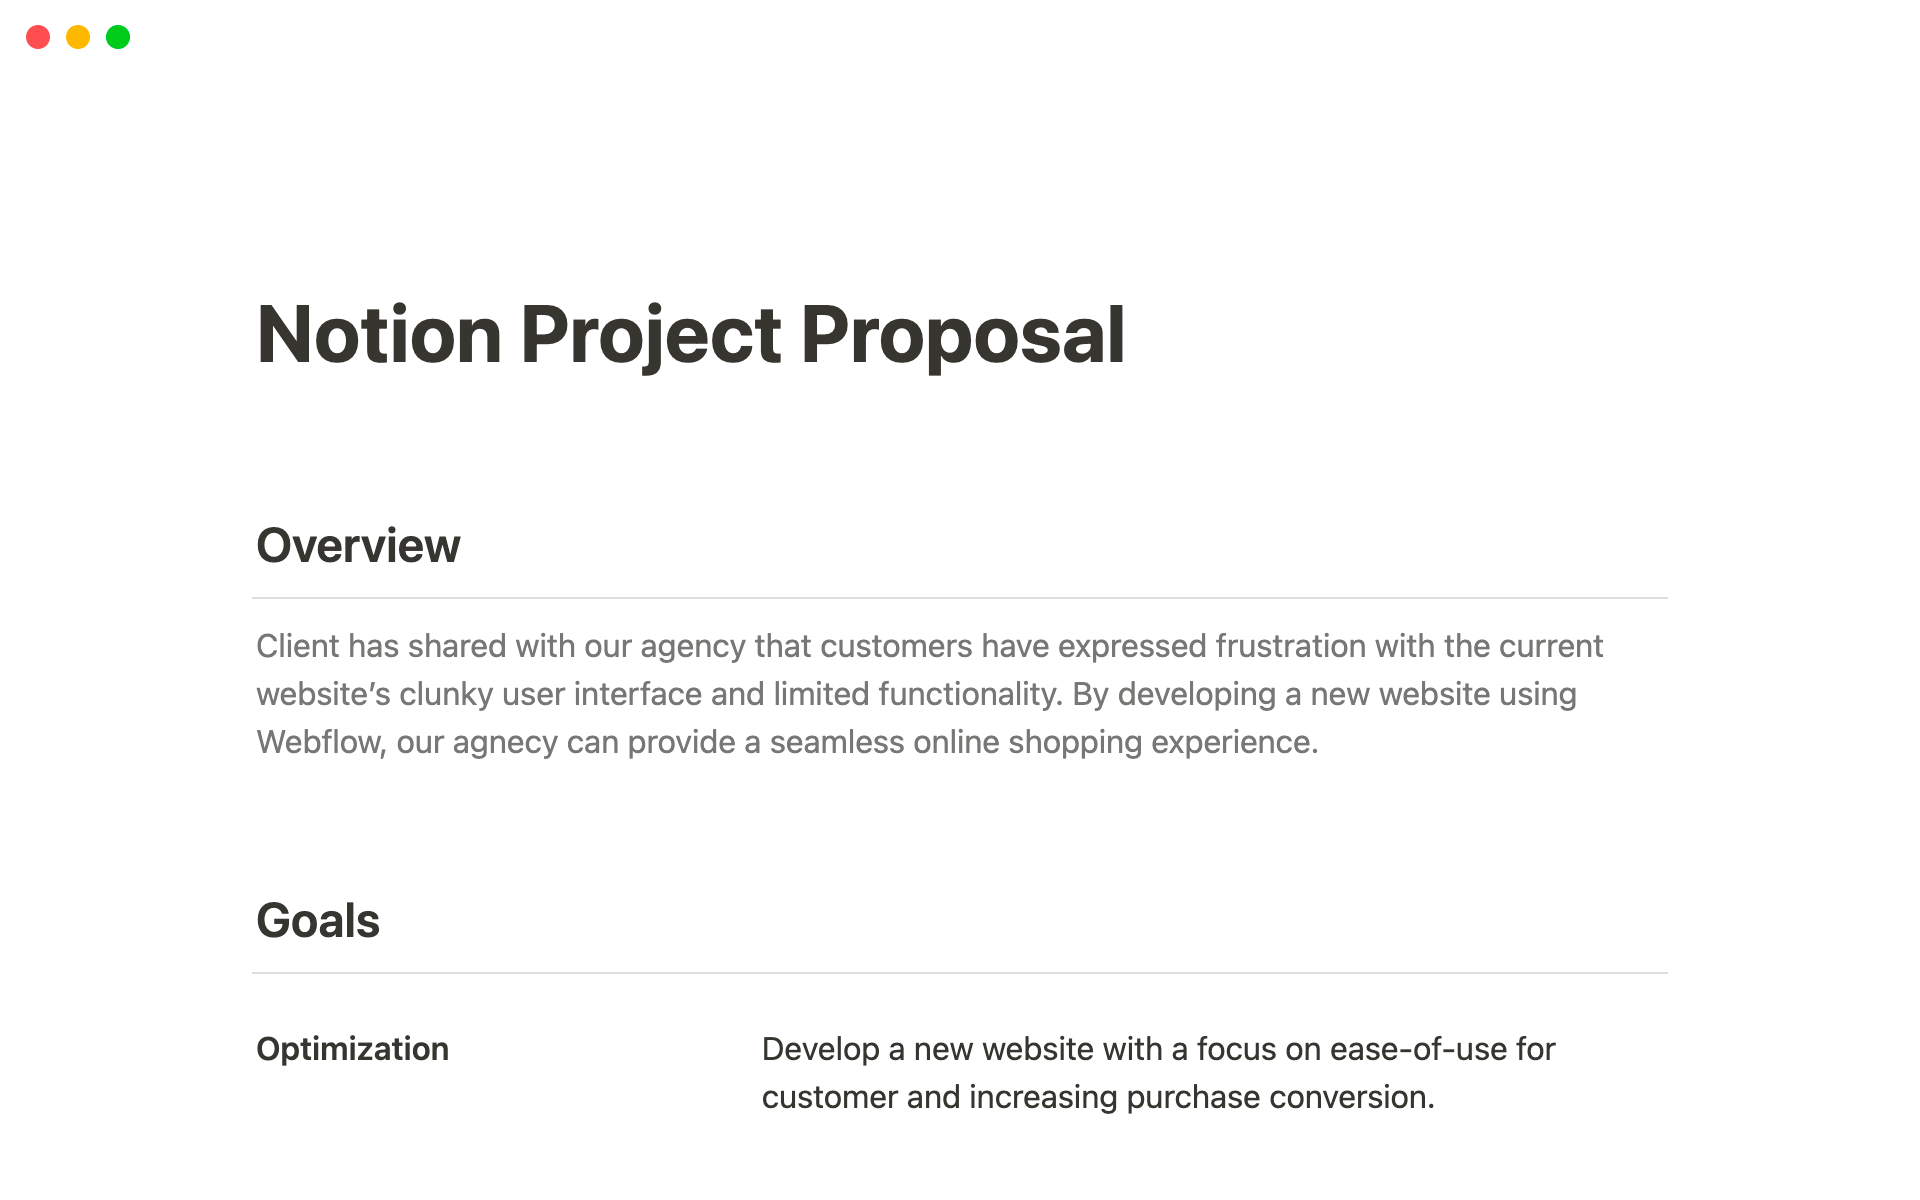 Create & share proposals to win clients.